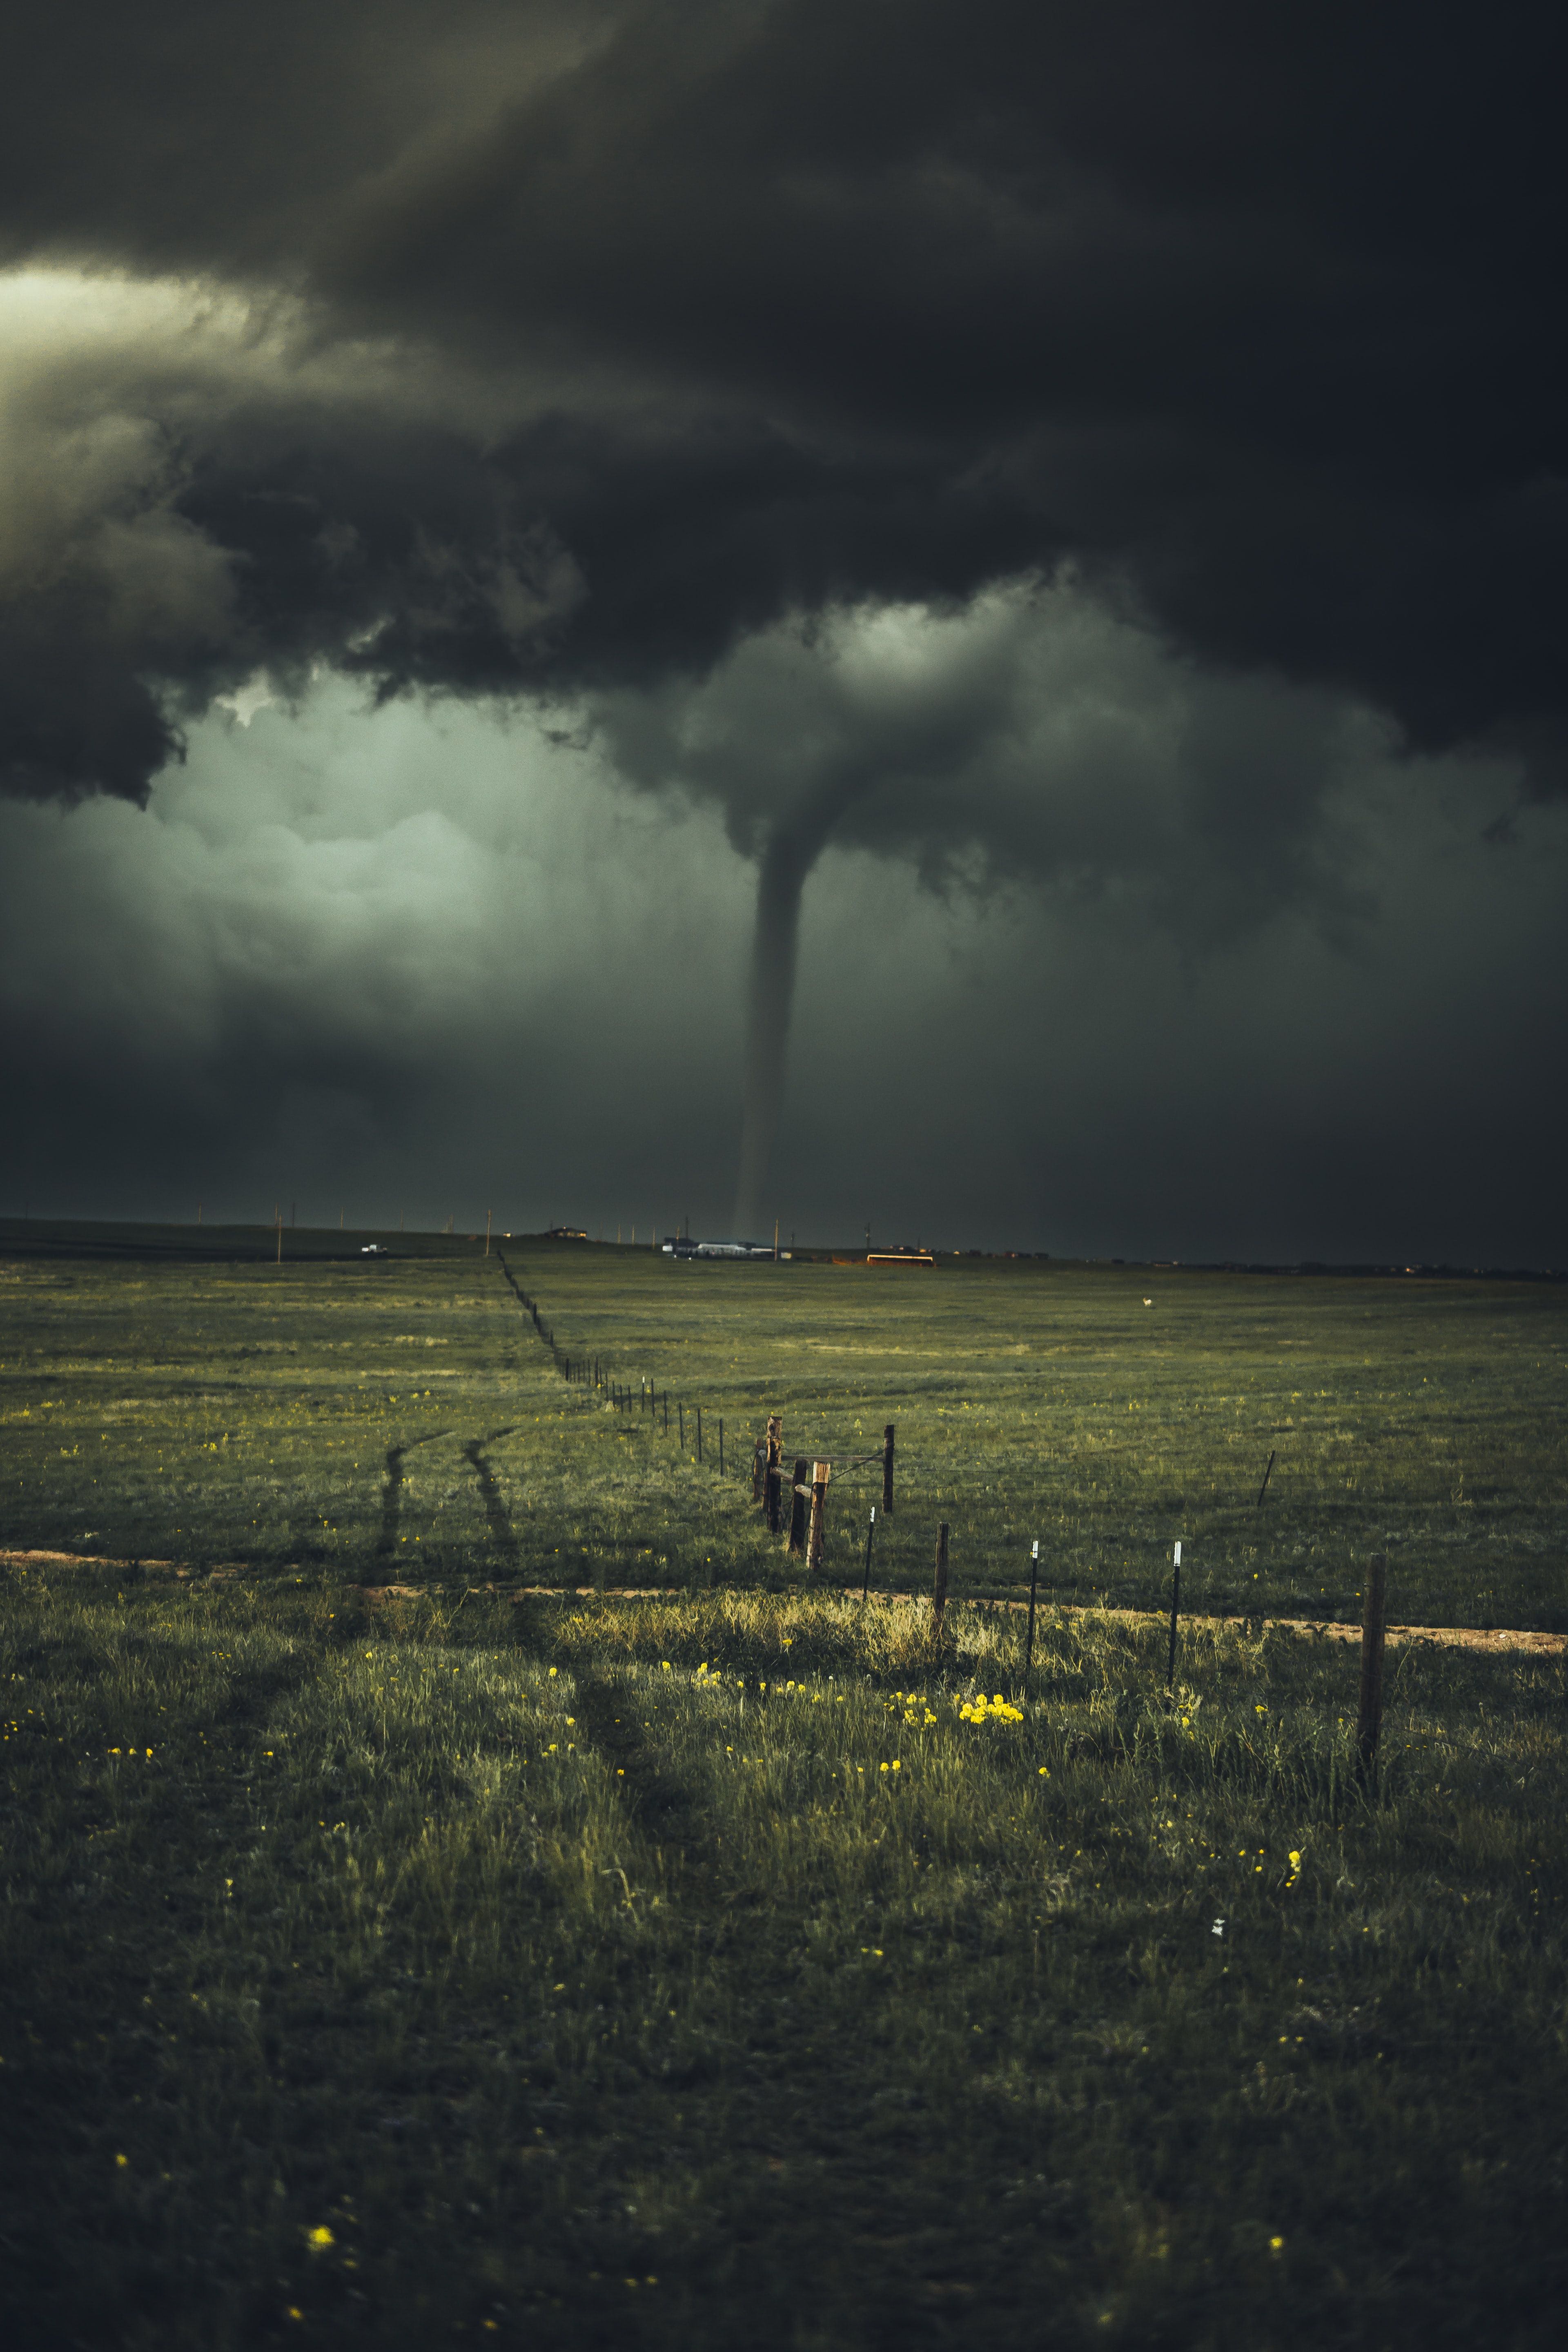 A tornado with dark clouds touching the earth